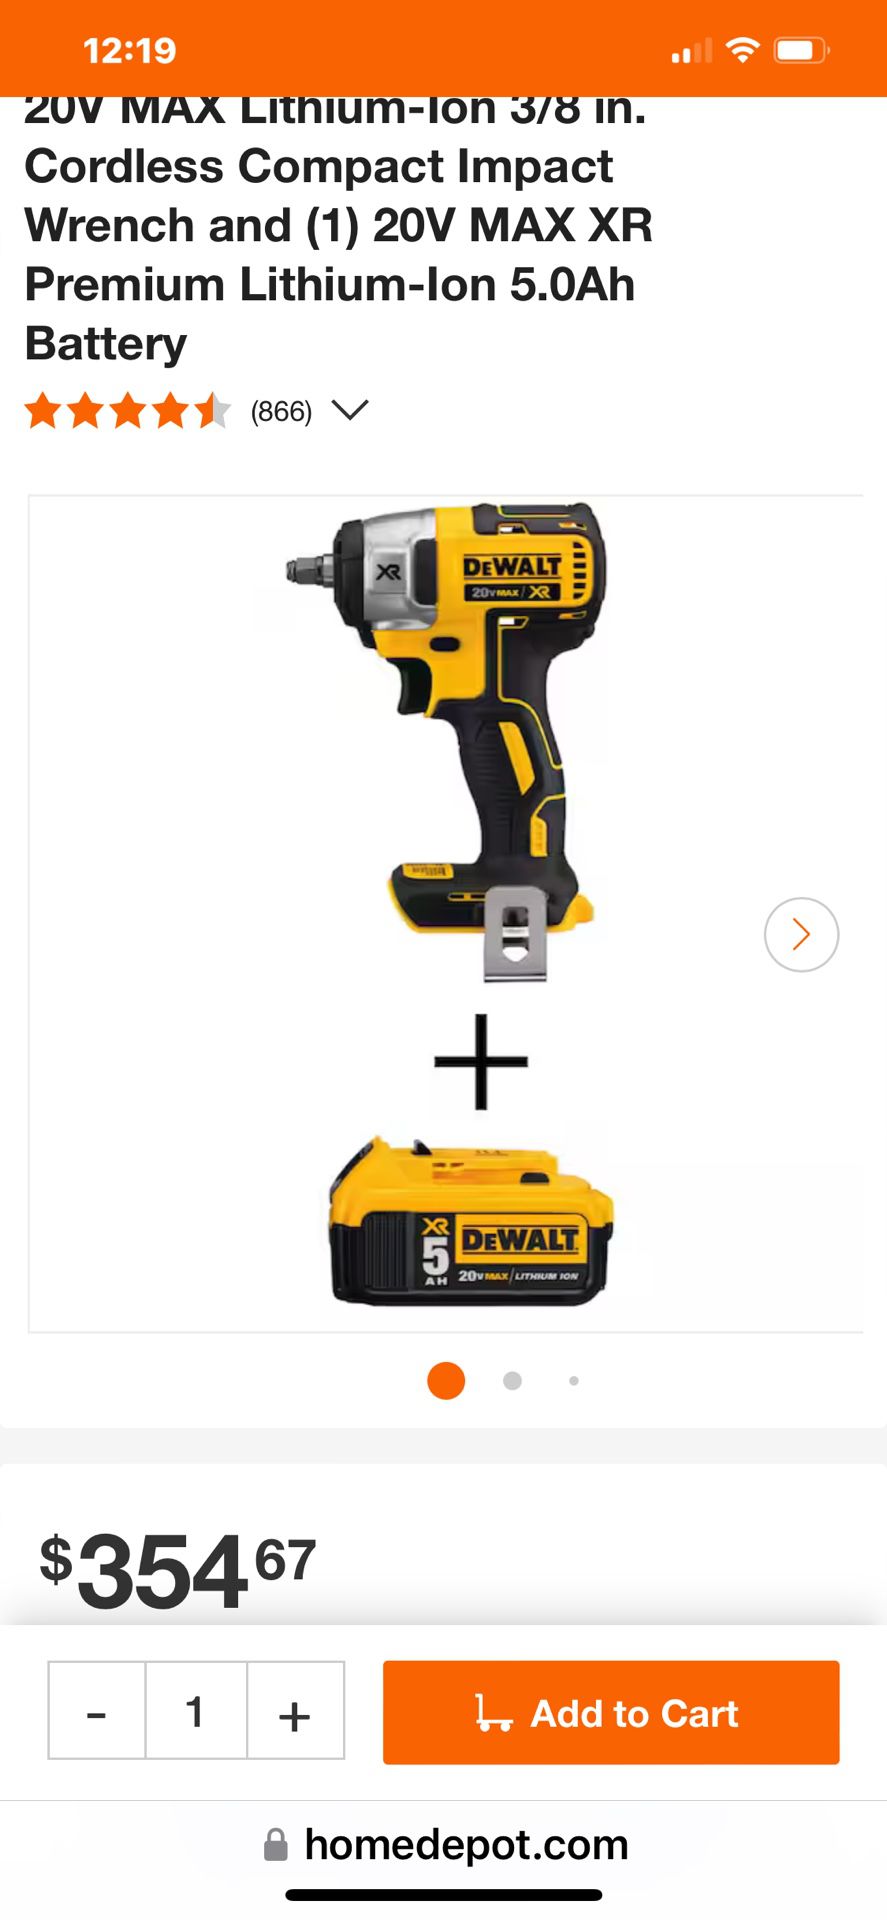 NEW DEWALT XR BRUSHLESS 3/8” IMPACT WRENCH AND 5.0 AH BATTERY 